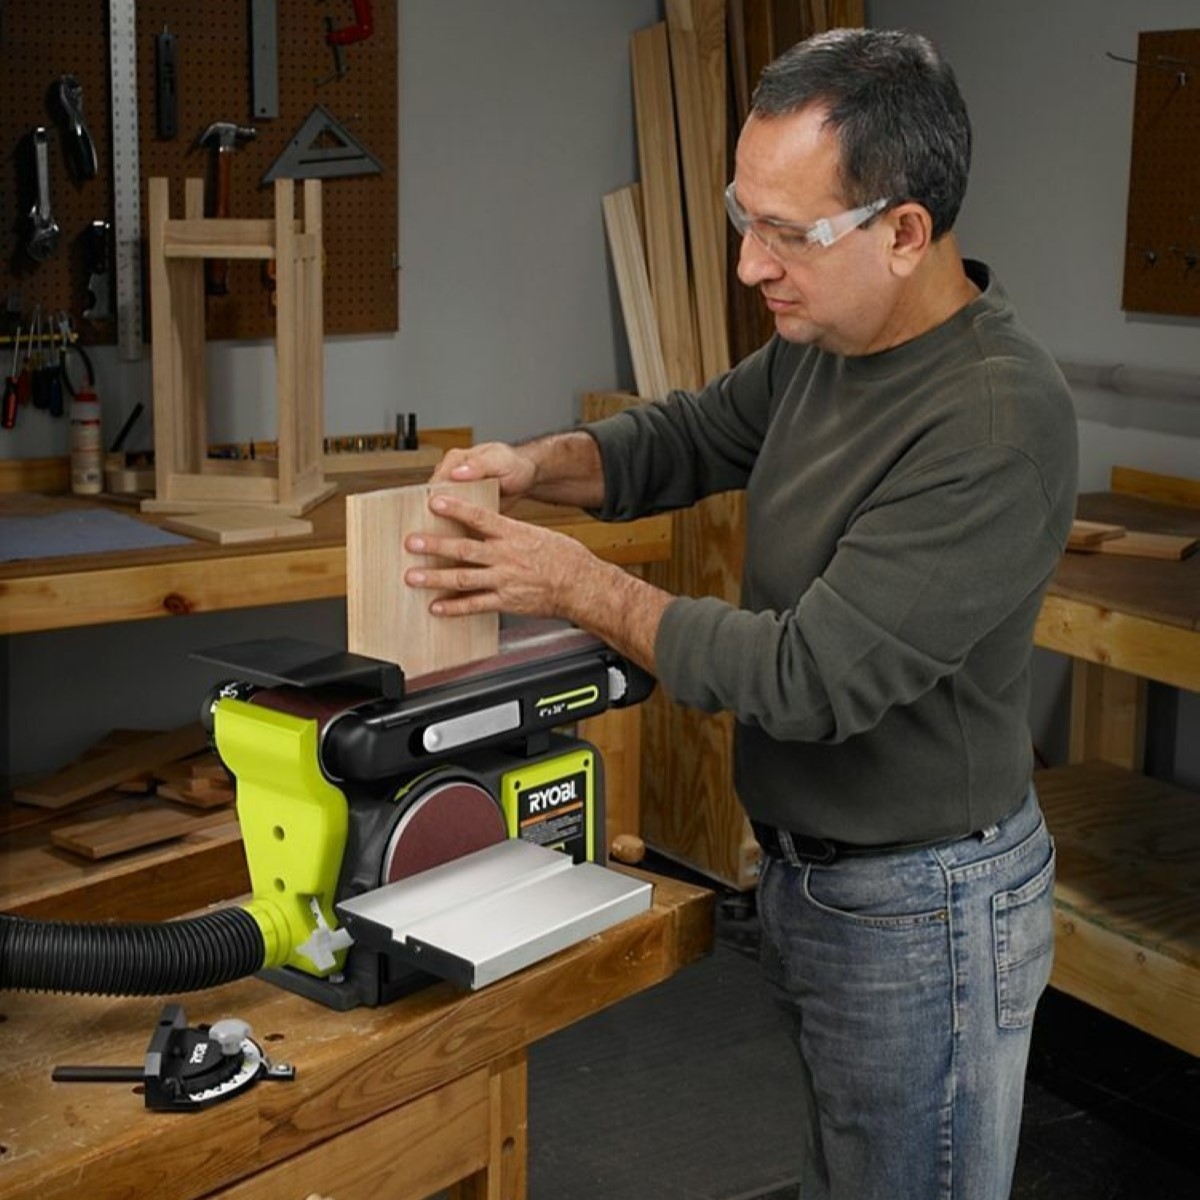 Man with goggles sanding wood with large green table sander.